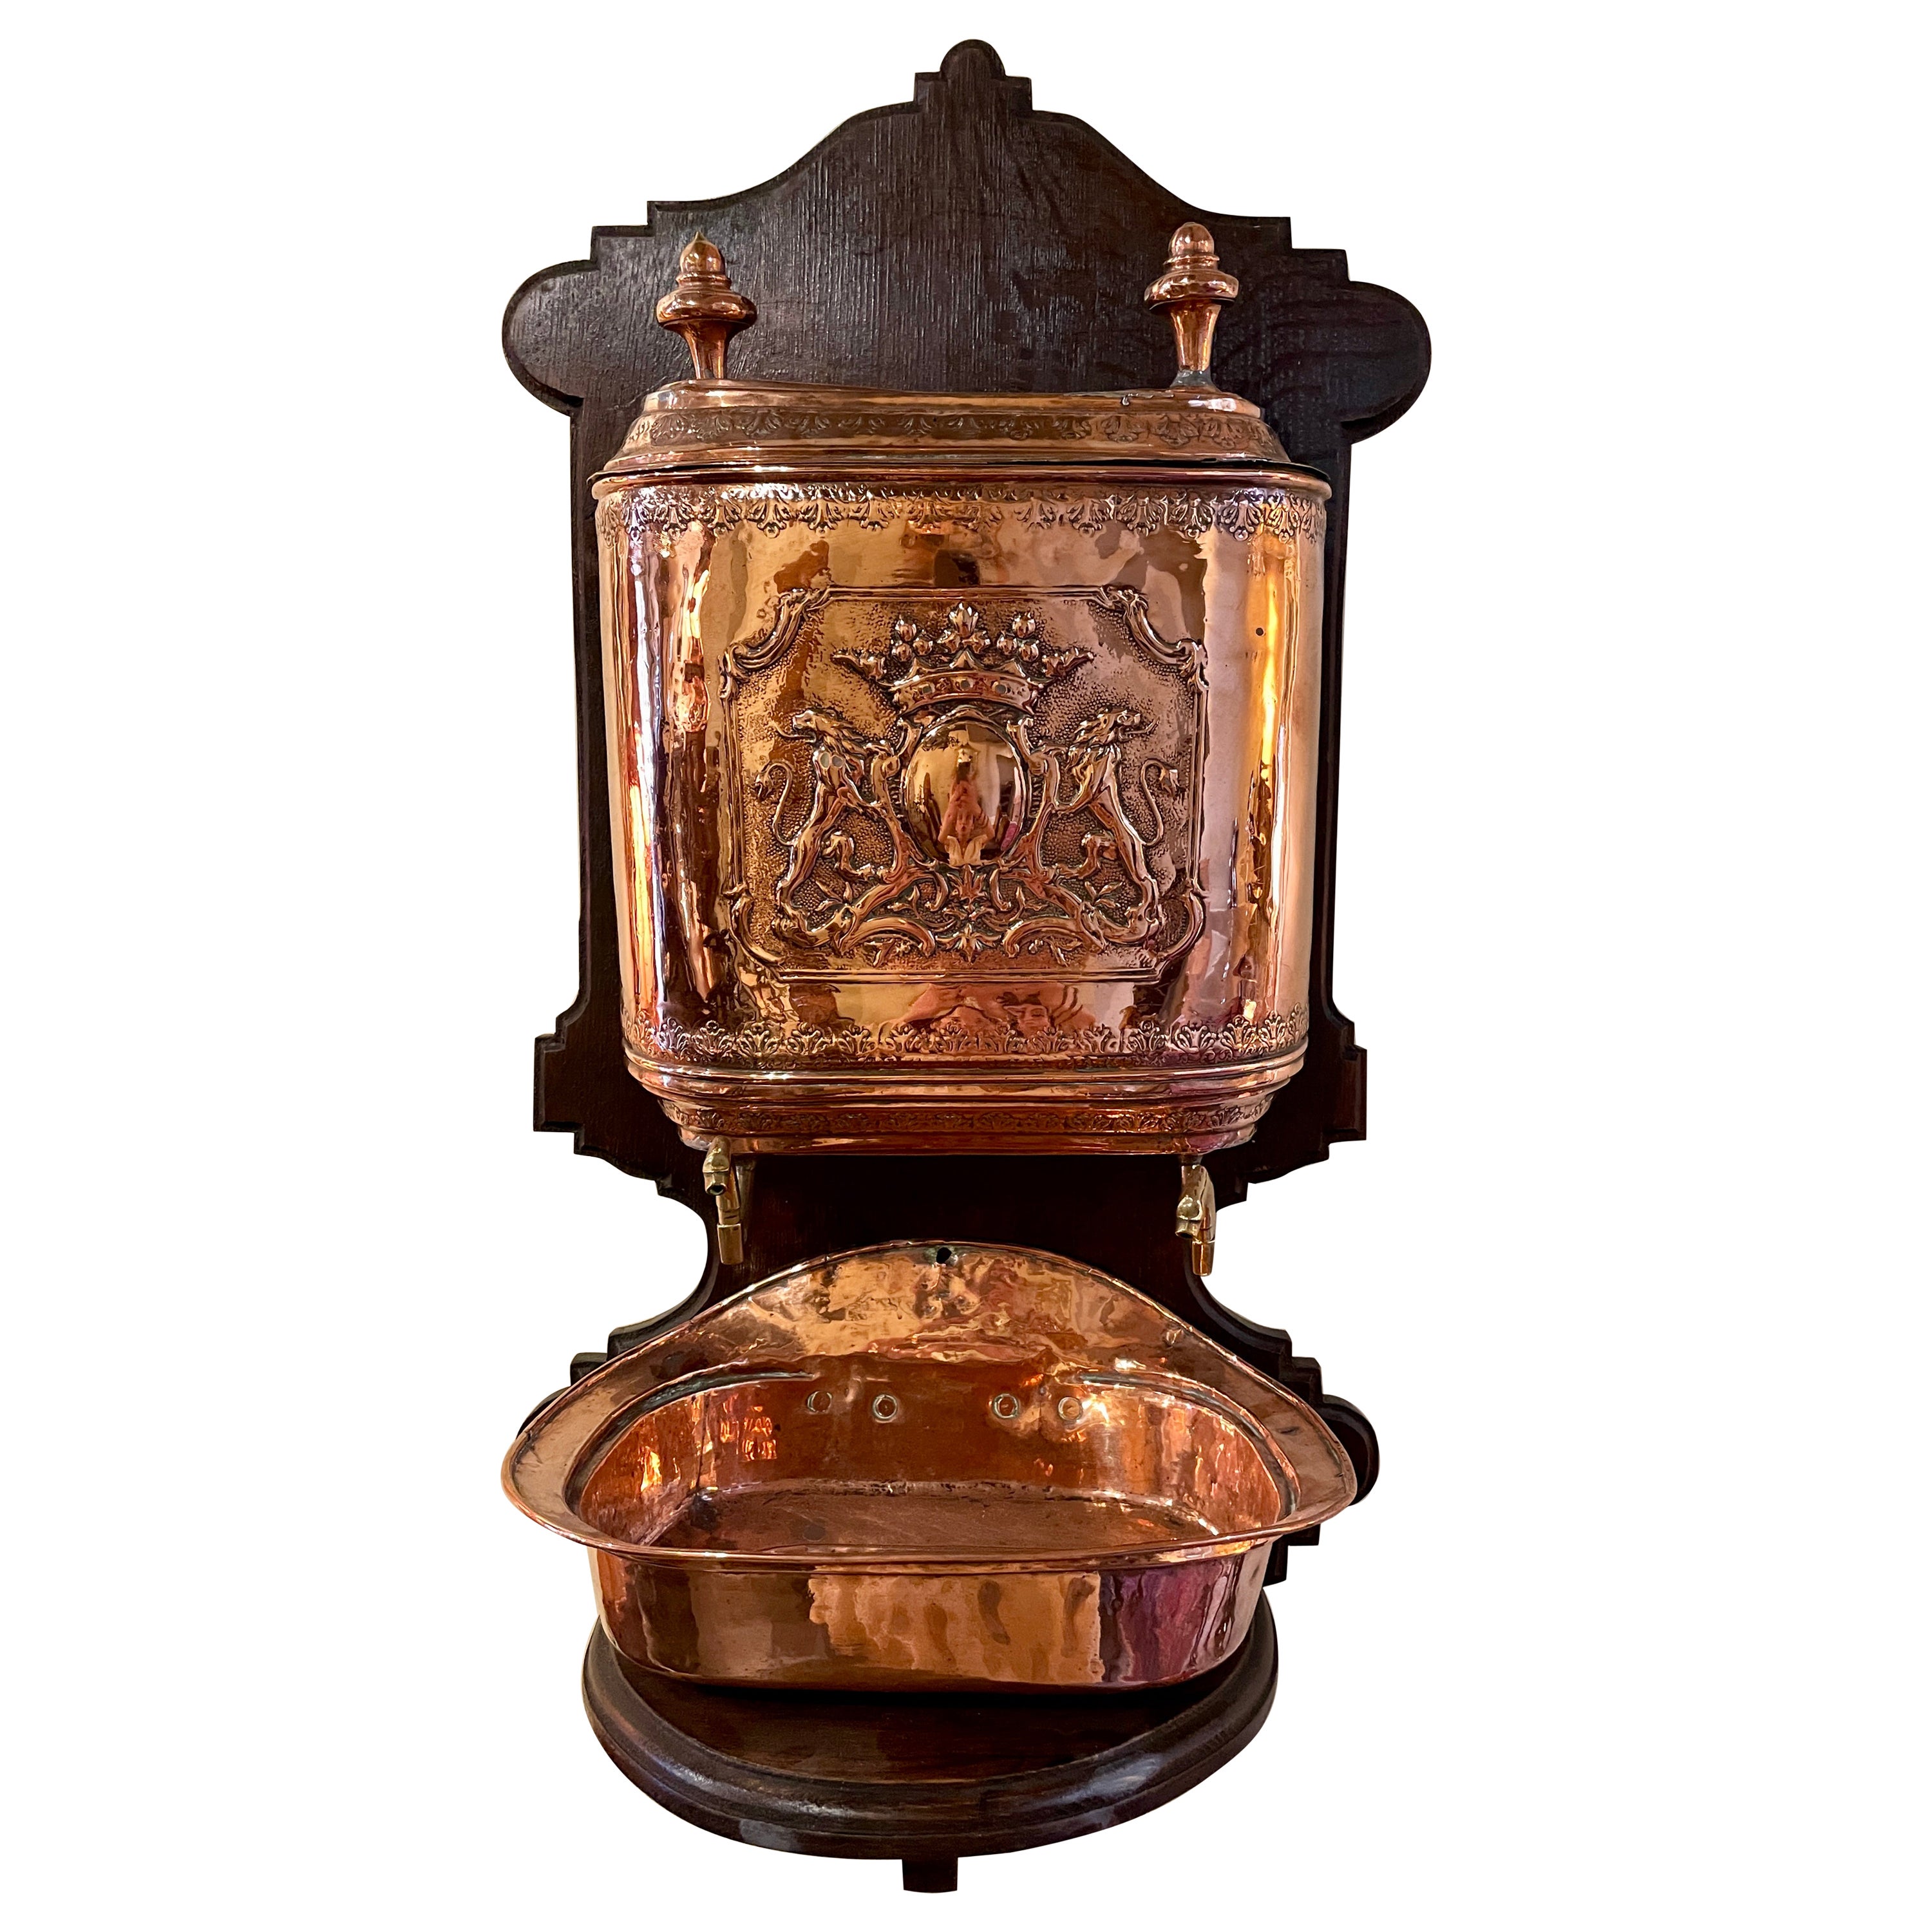 Antique French Wall-Mounted Copper Lavabo, Circa 1860-1880 For Sale